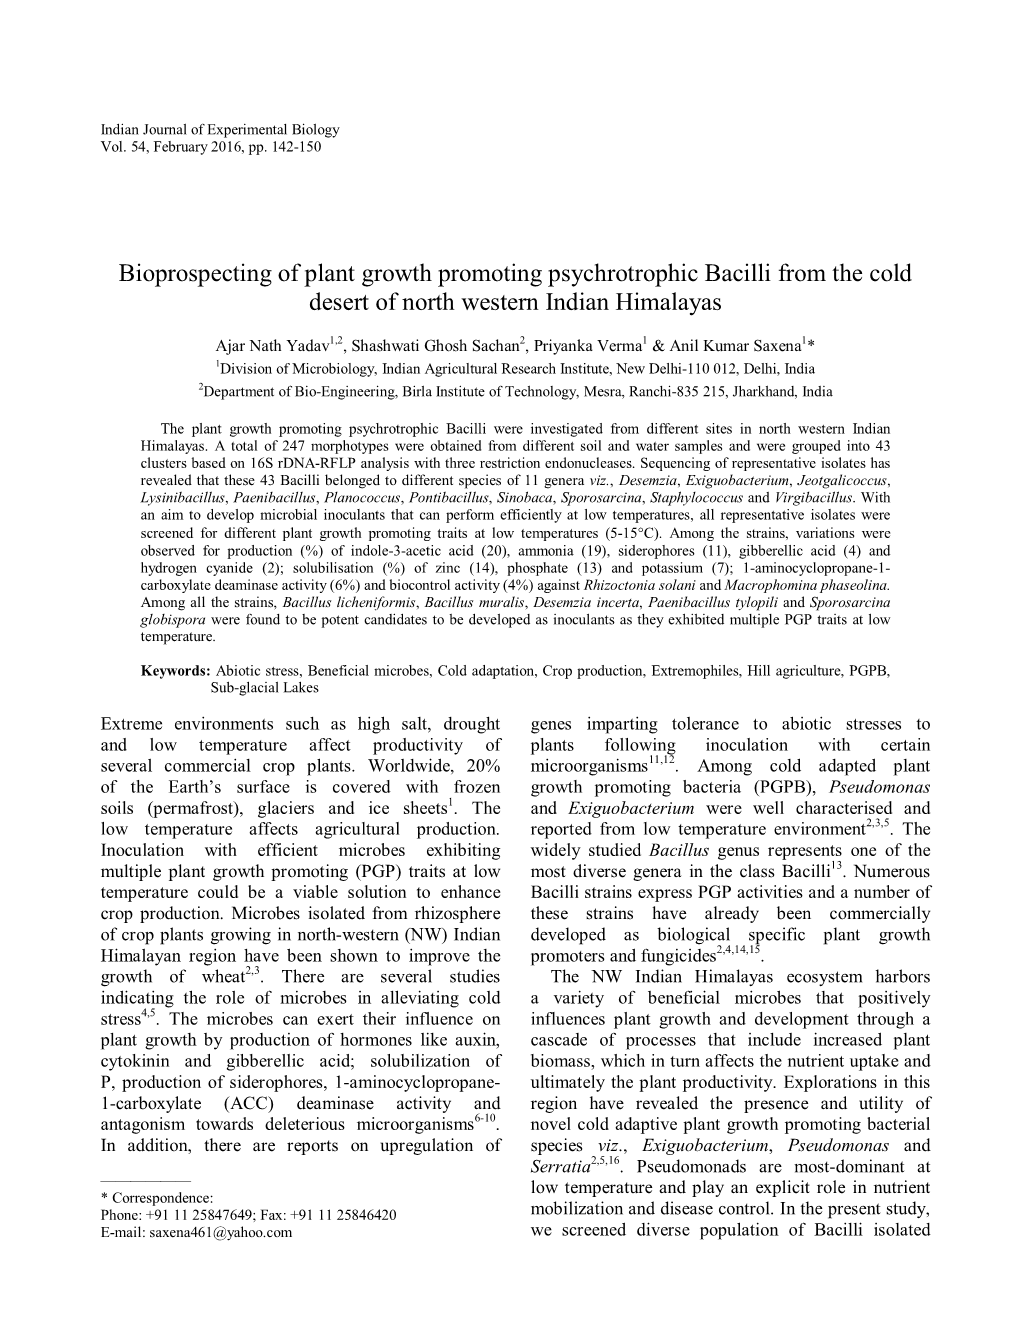 Bioprospecting of Plant Growth Promoting Psychrotrophic Bacilli from the Cold Desert of North Western Indian Himalayas